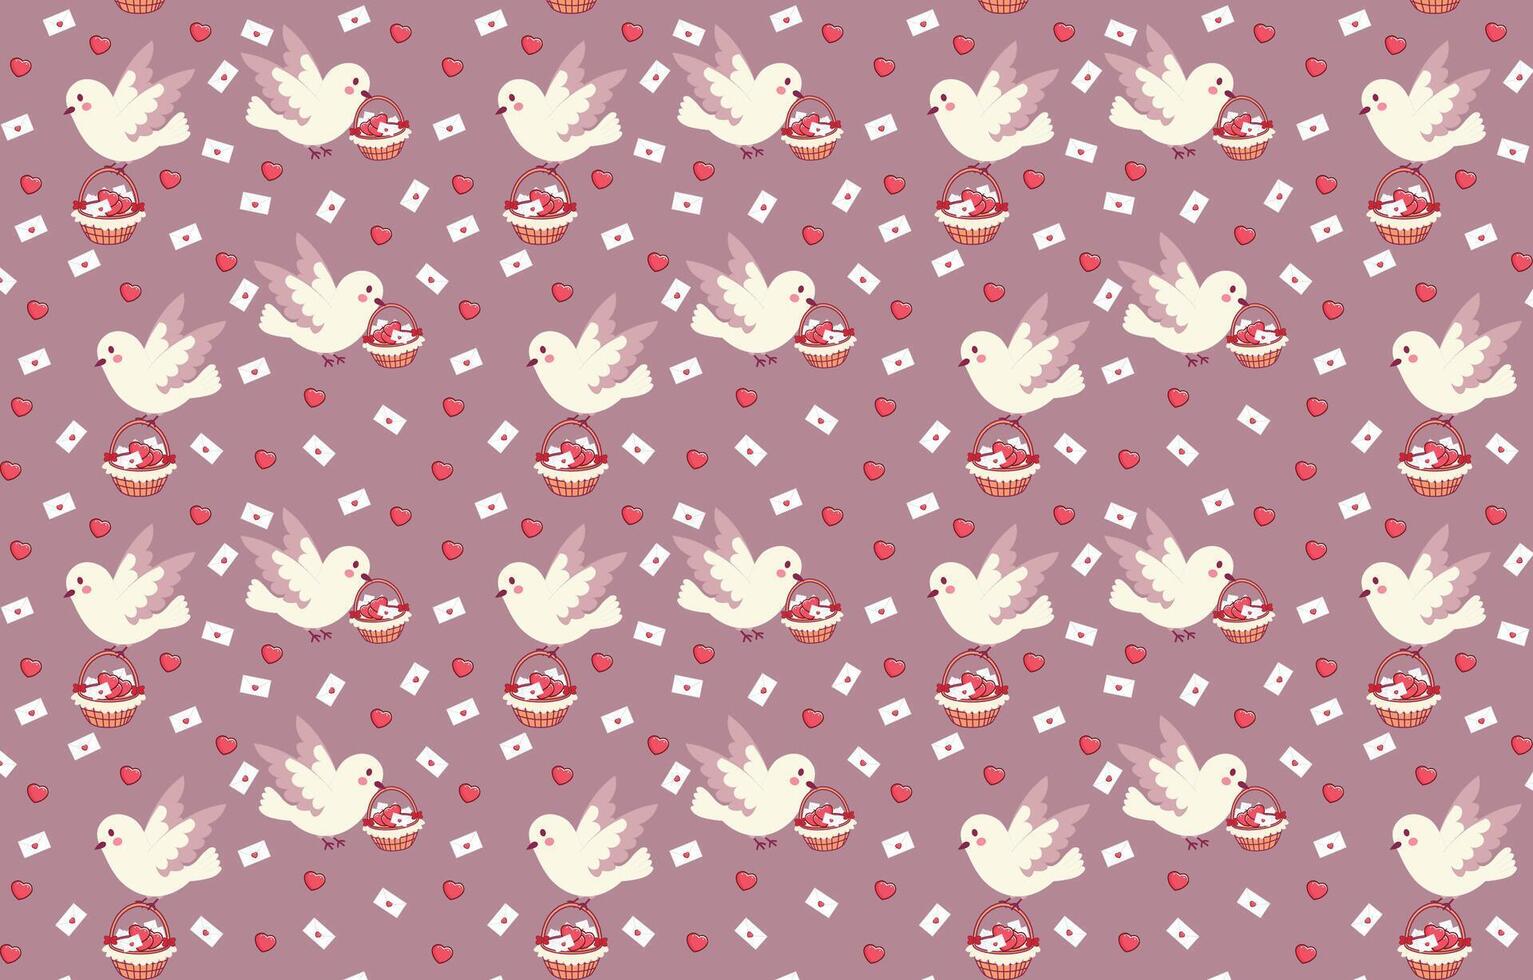 lovebird, dove, pigeon, vector illustration, for backgrounds and fabrics pattern, repeat, love